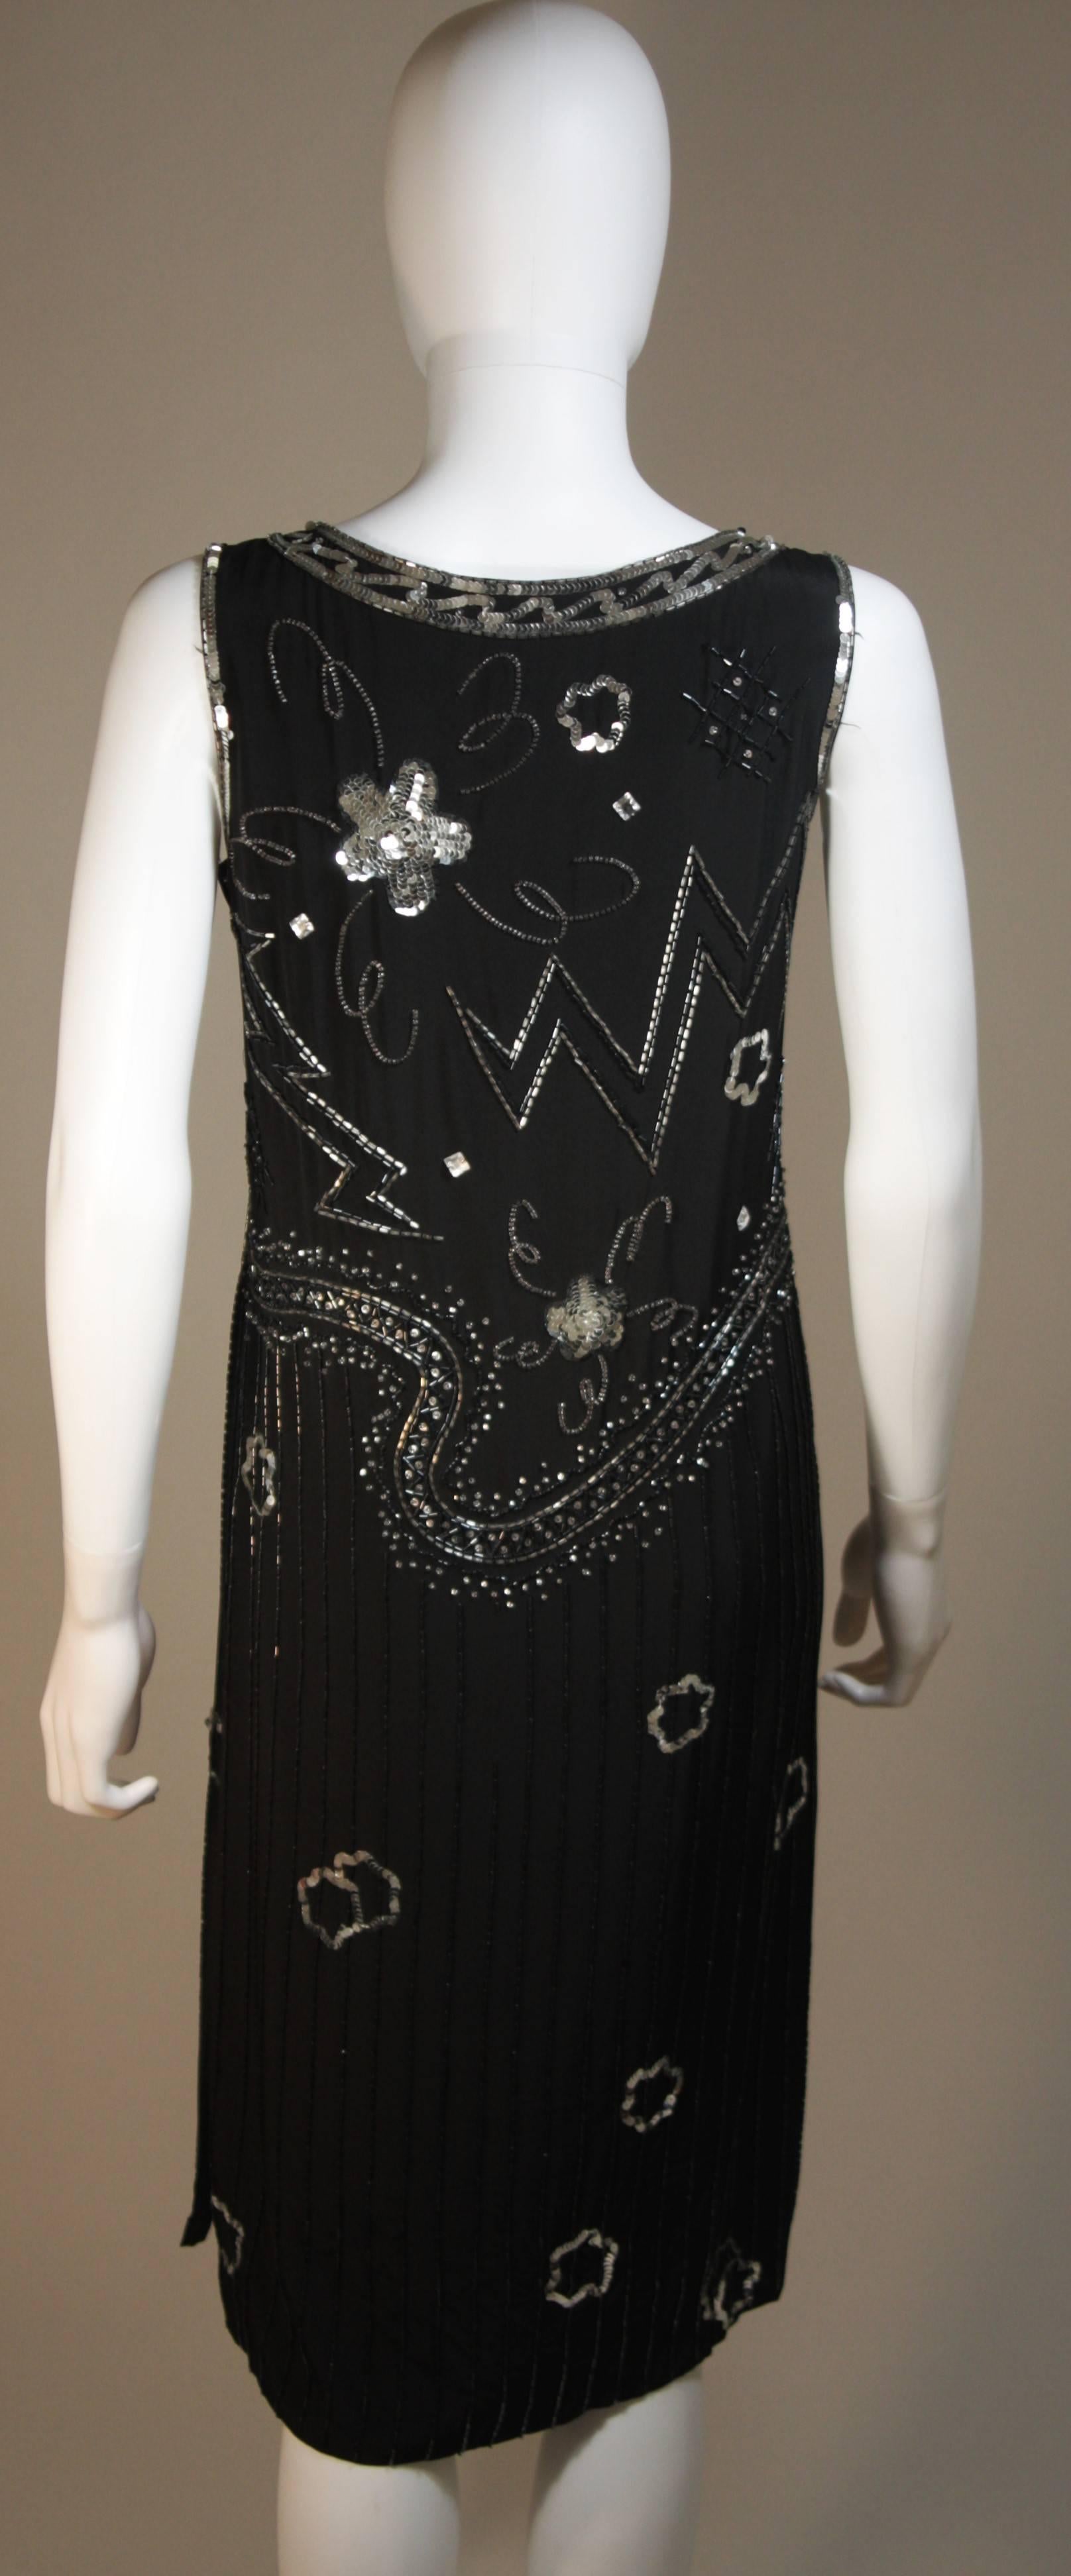 GIORGIO BEVERLY HILLS Sequin Embellished Deco Inspired Cocktail Dress Size 4-6 For Sale 3